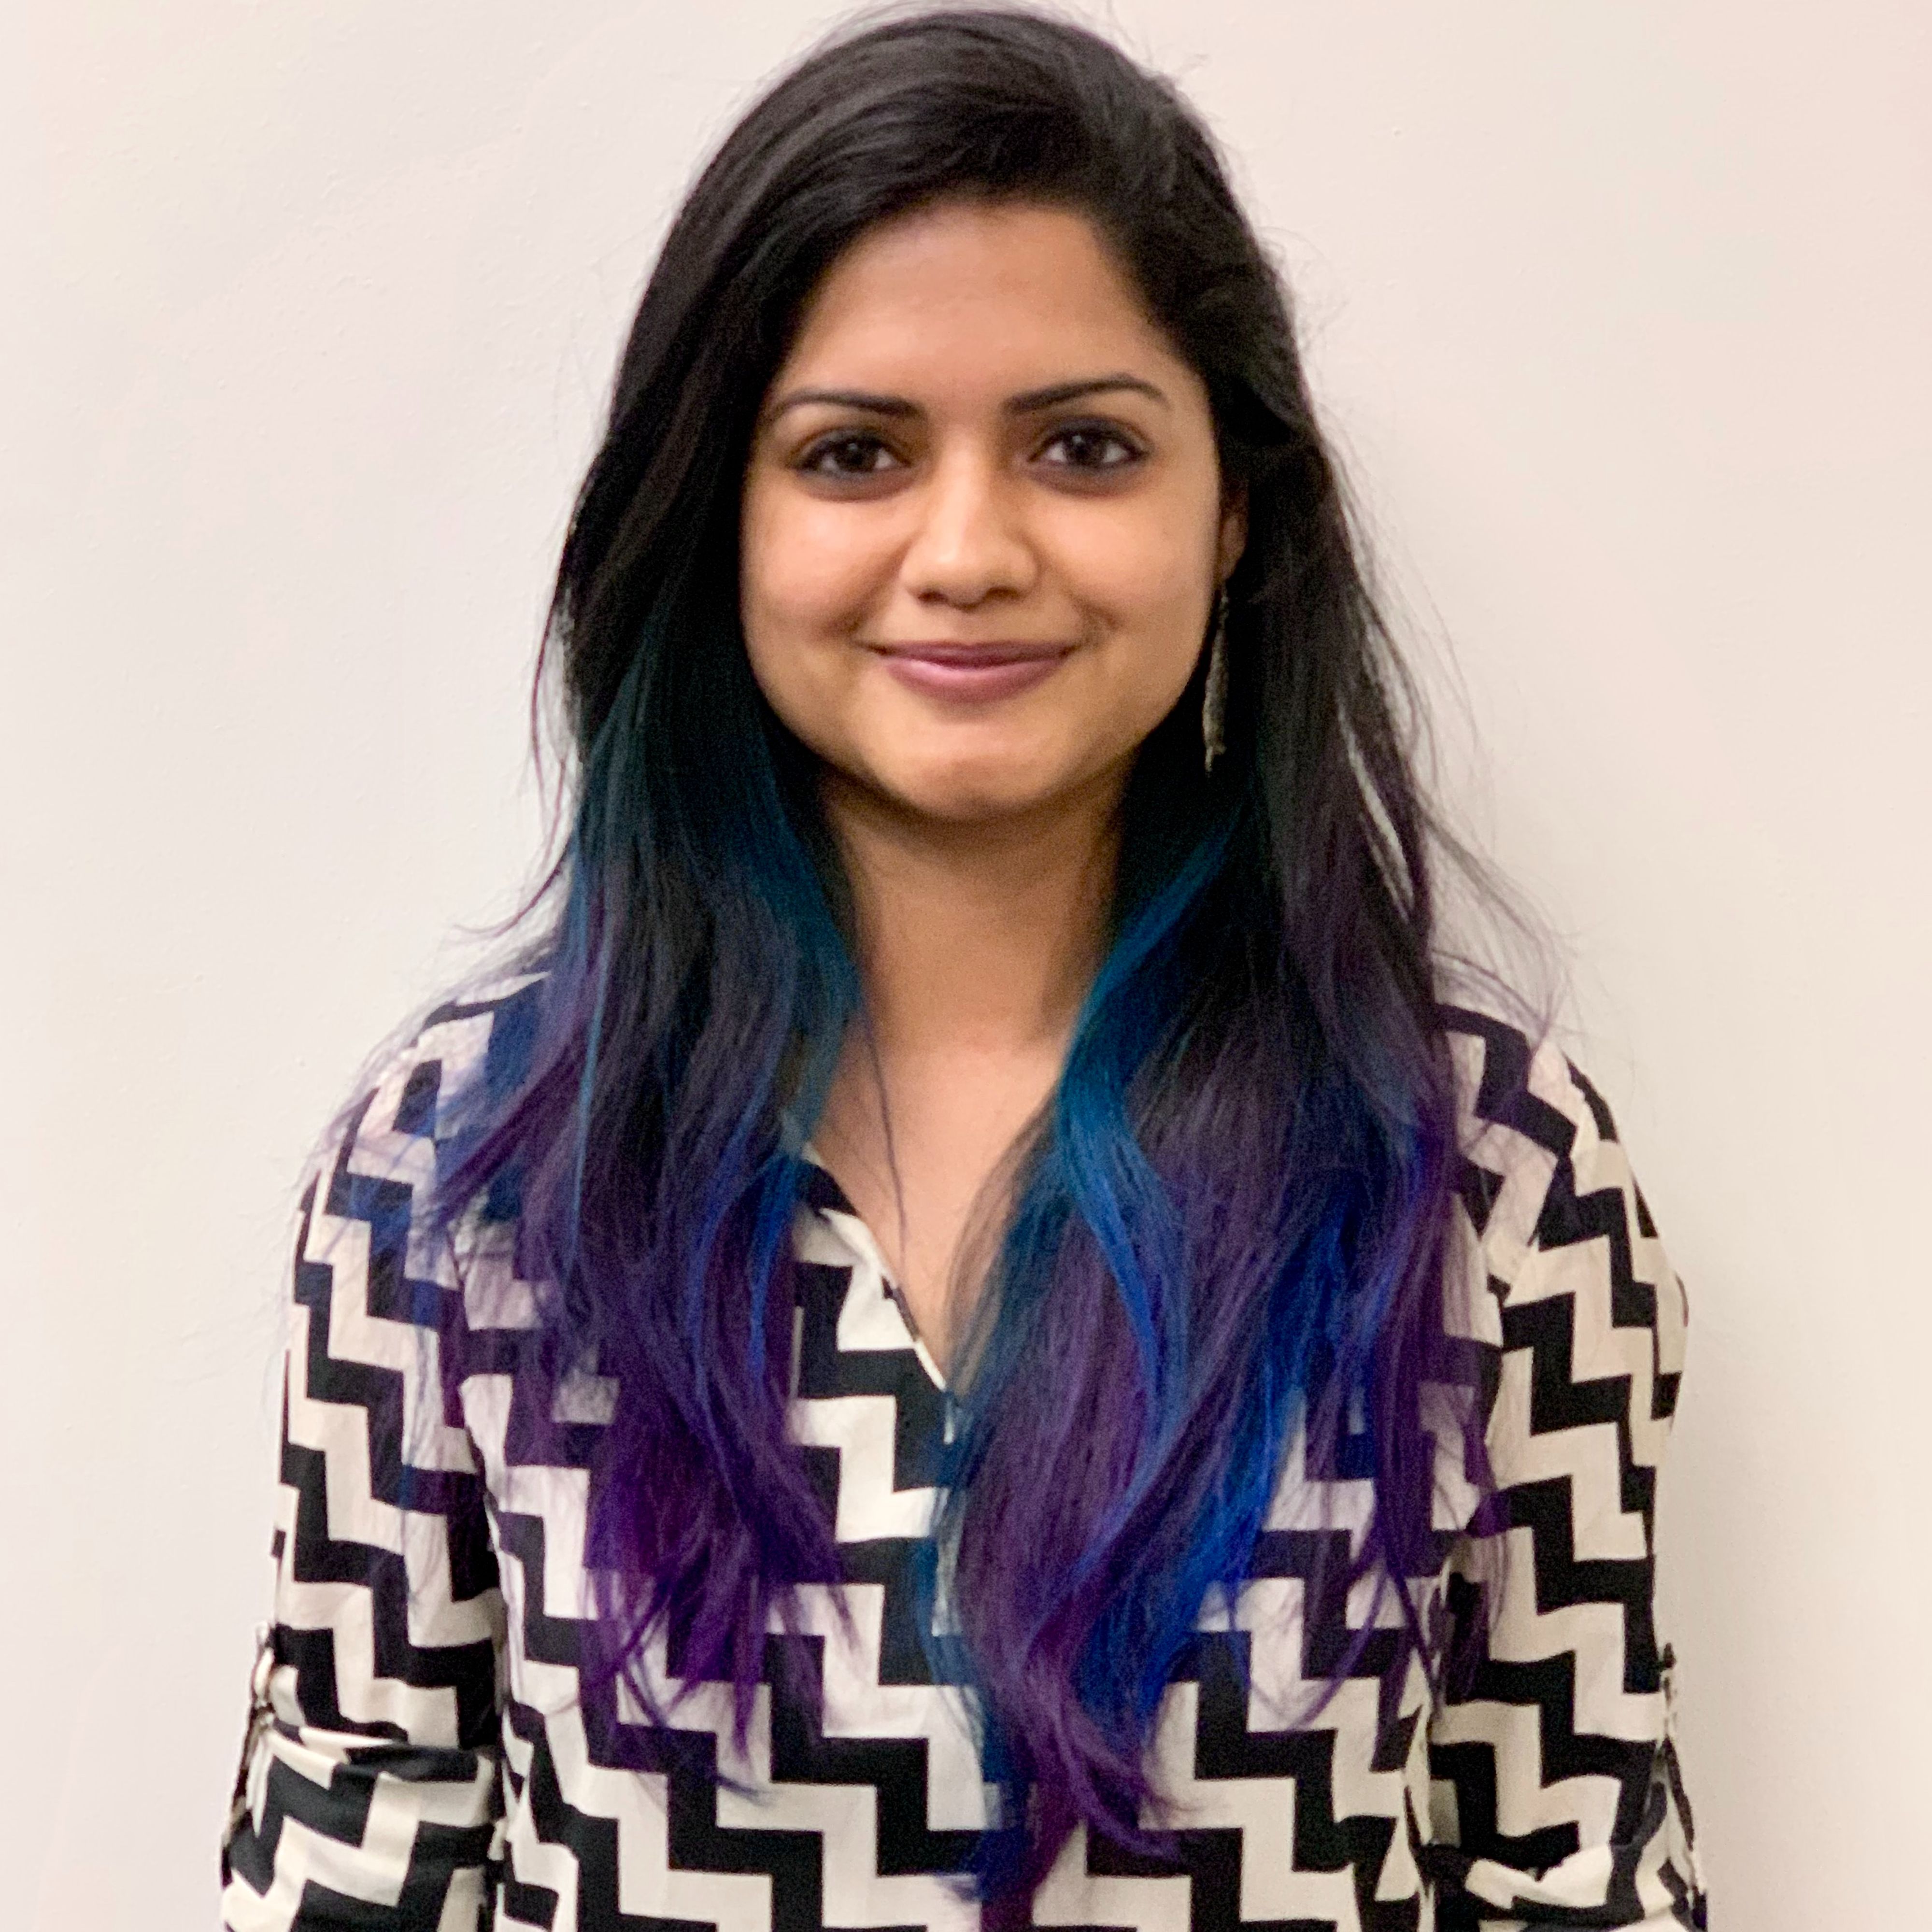 Kaush smiling, with striking blue and purple highlights at the bottom of her dark hair